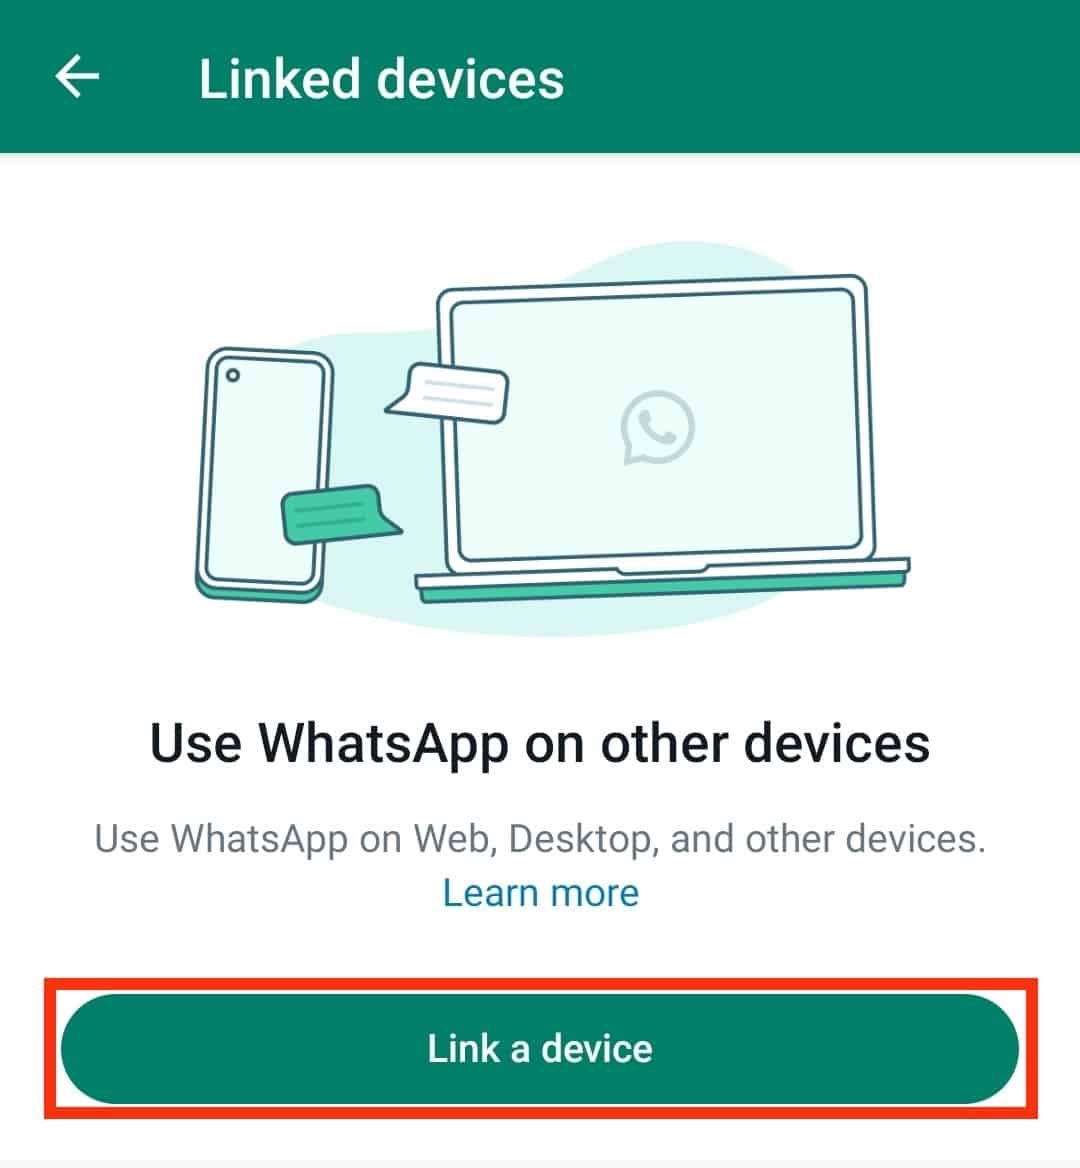 Tap On The Link A Device